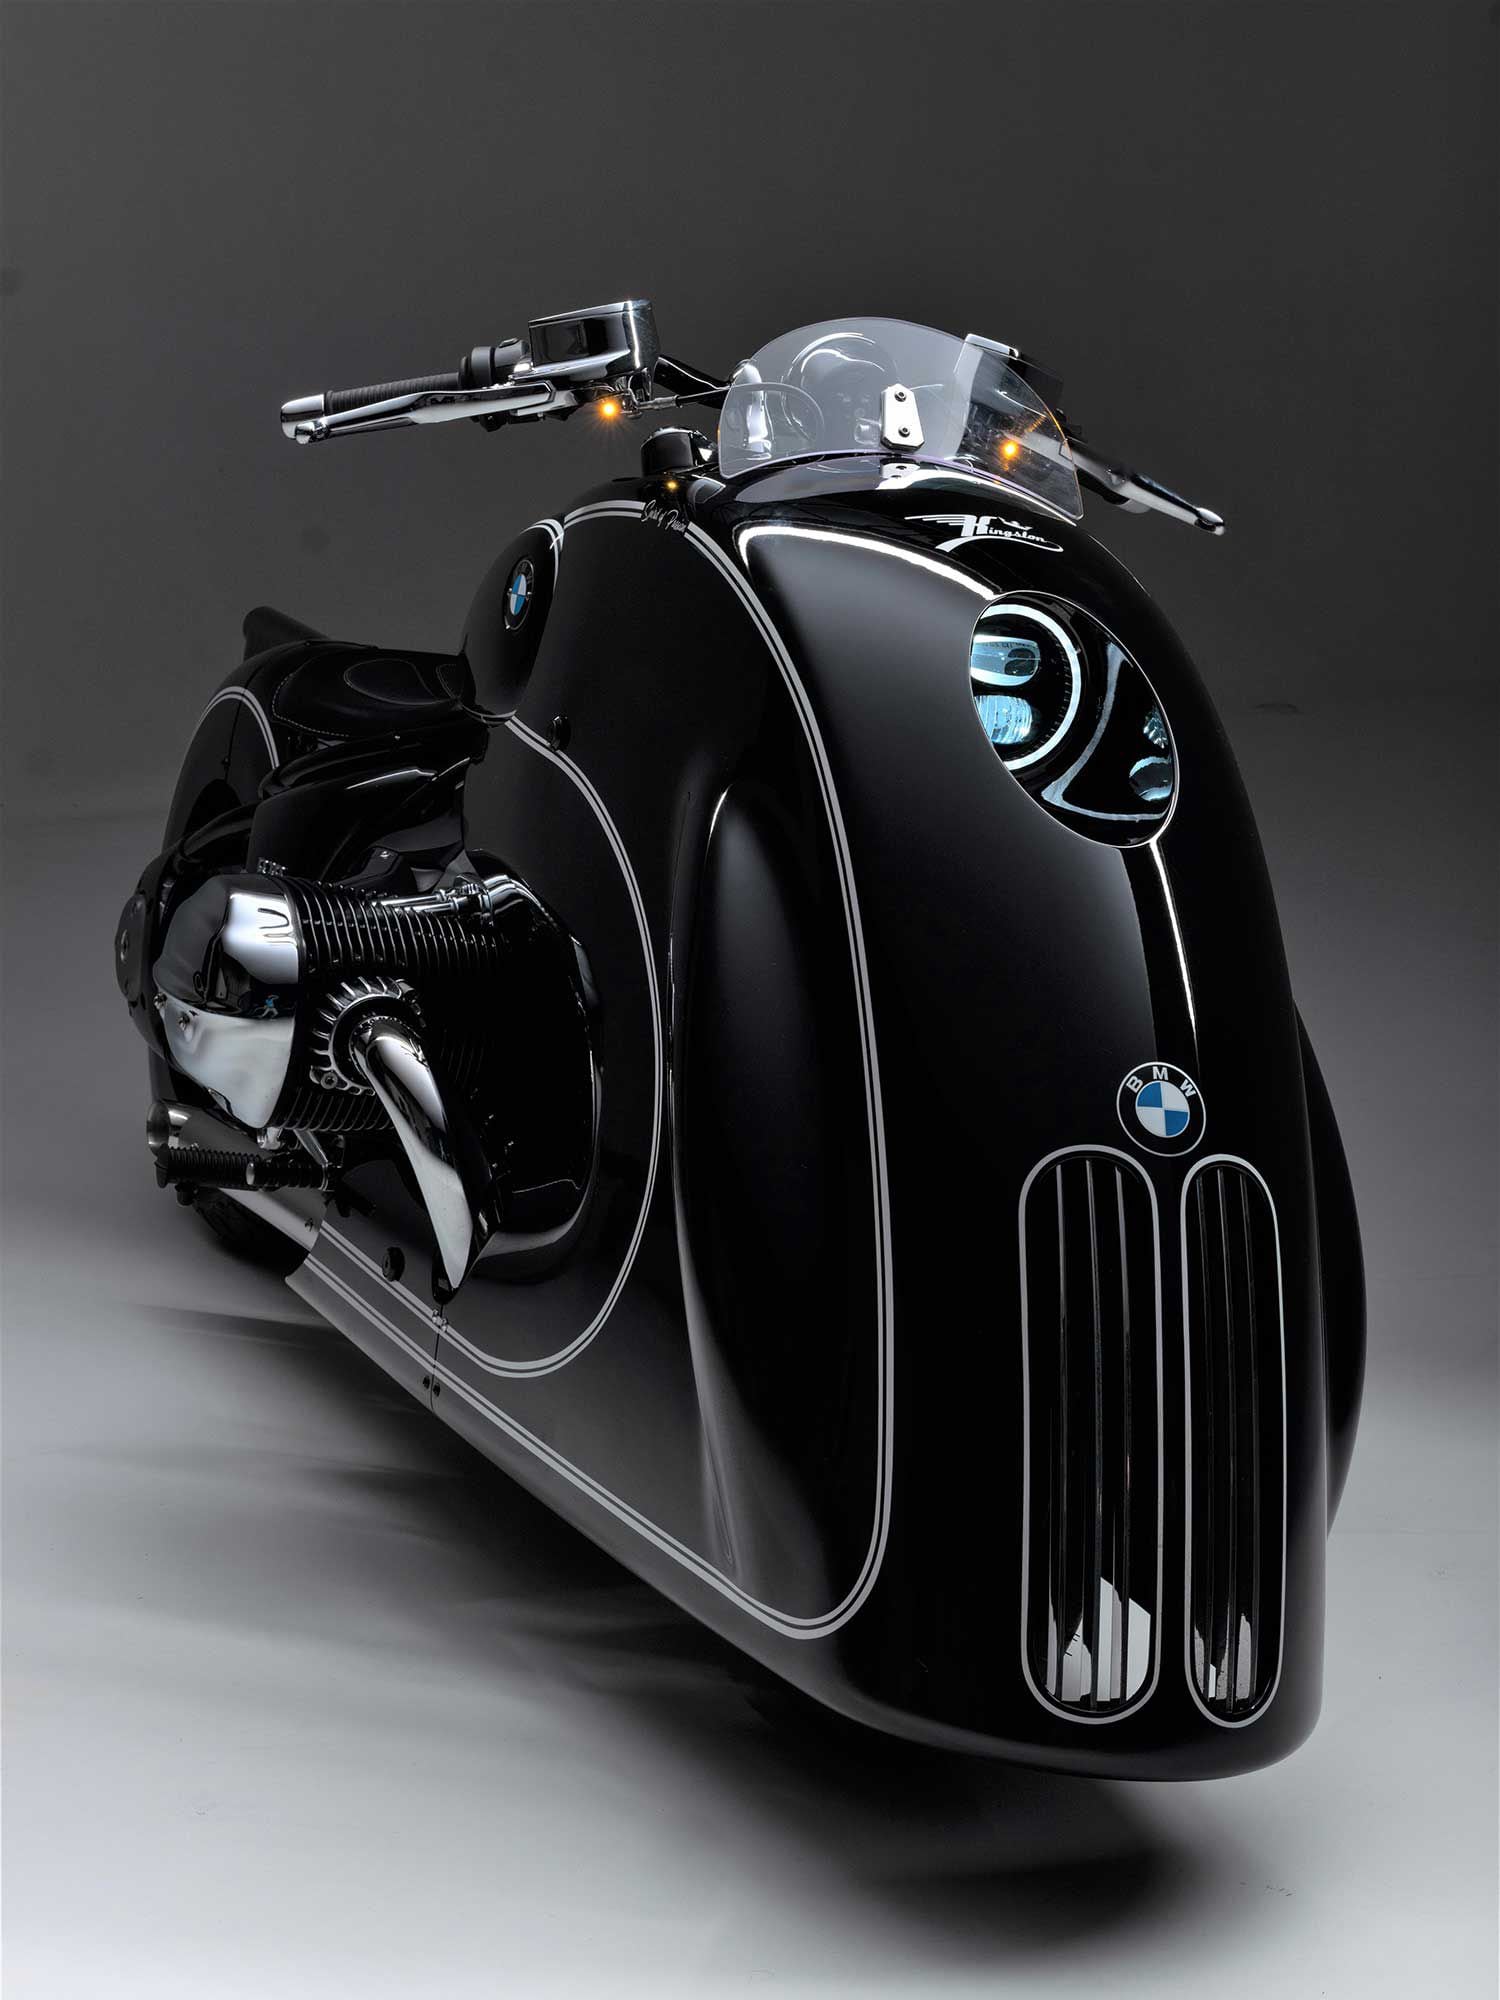 Front grille element is a nod to 1930s-era BMW roadster.